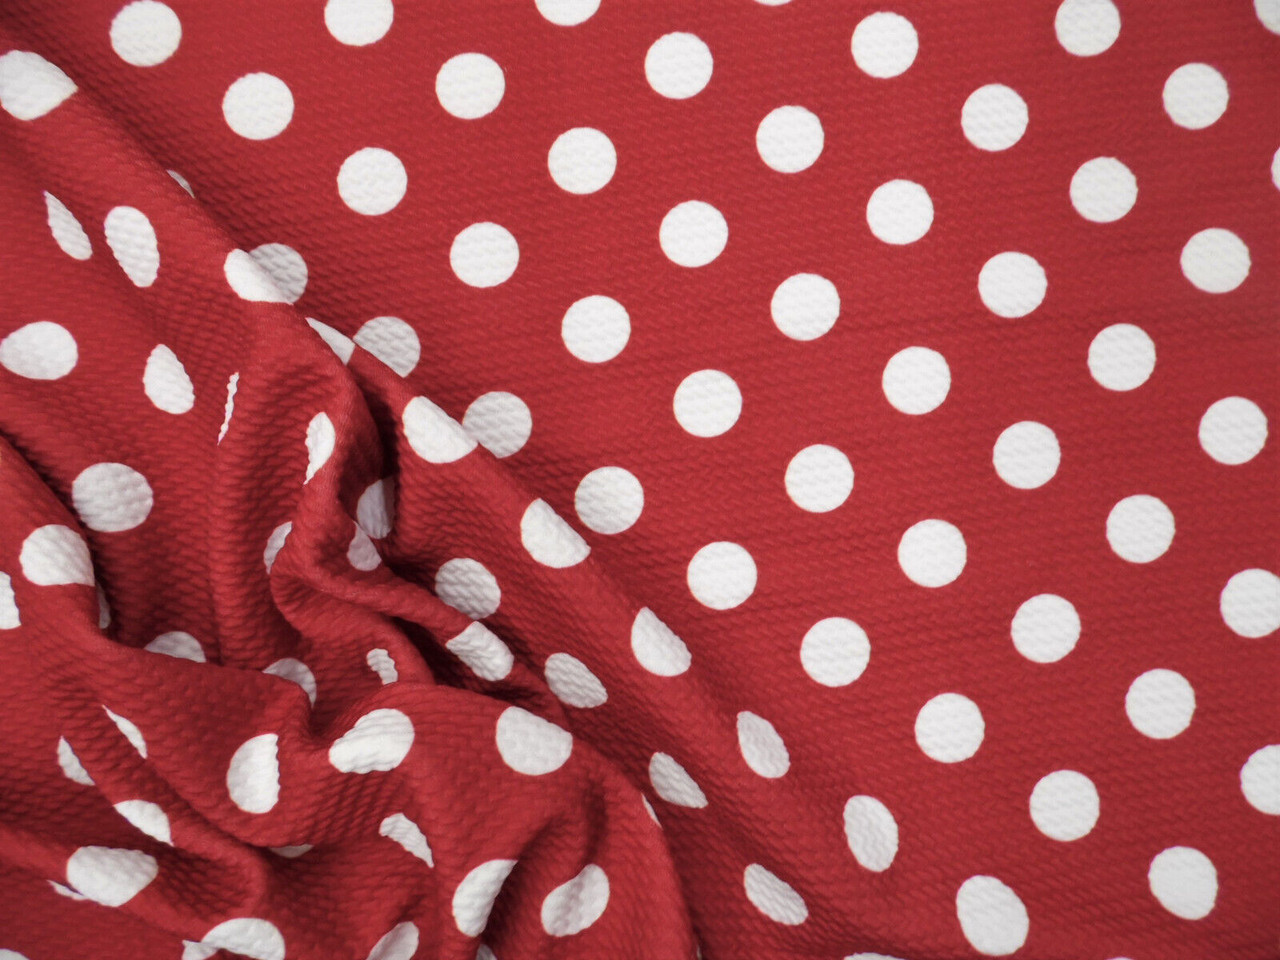 Bullet Printed Liverpool Textured Fabric 4 way Stretch Red White Polka Dot P29